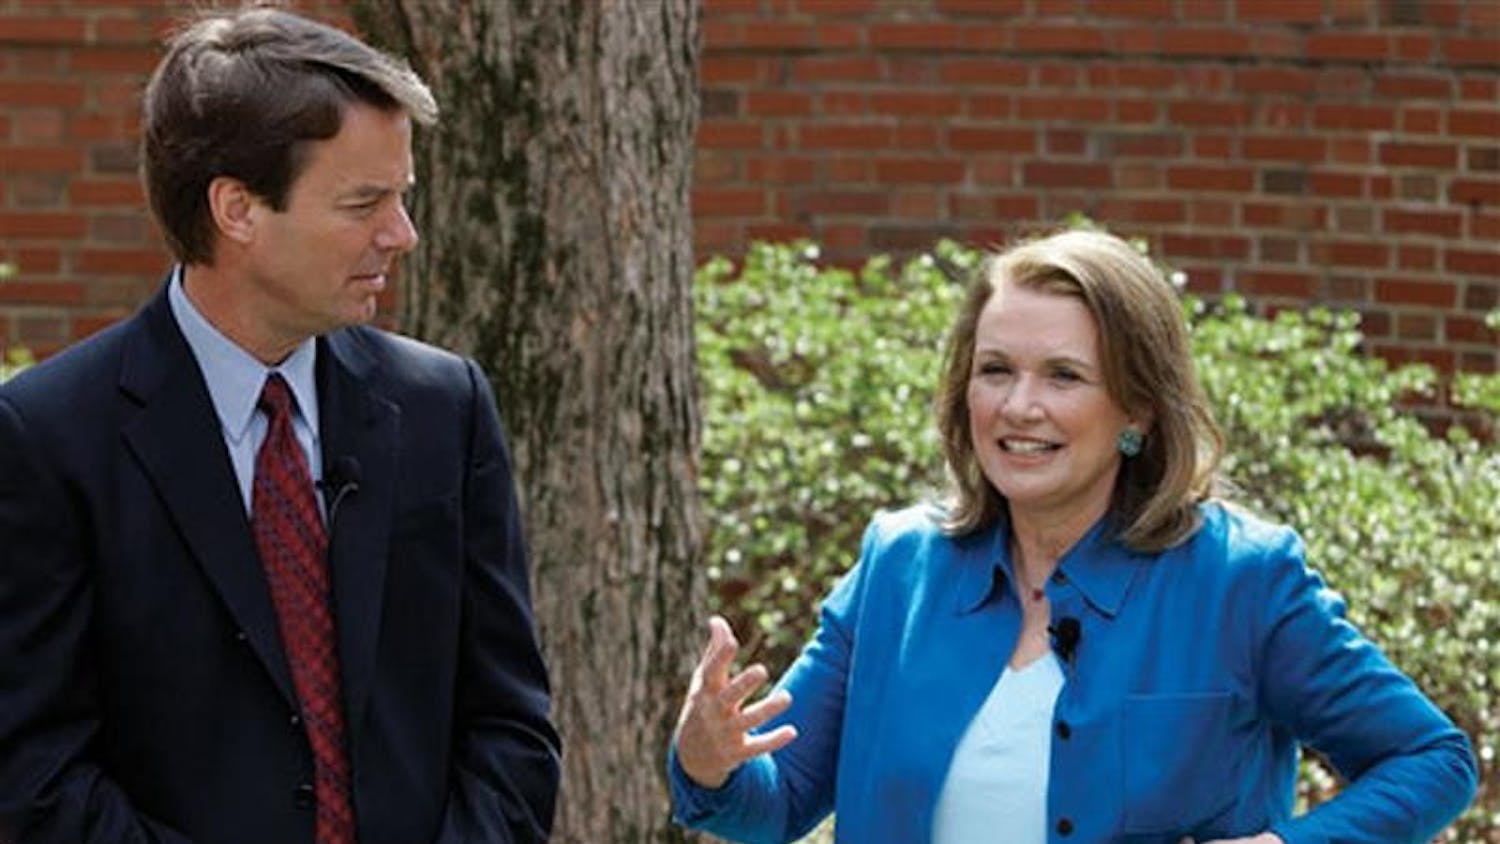 The-democratic presidential hopeful John Edwards listens as his wife Elizabeth speaks about her recurrence of cancer during a news conference on March 22 in Chapel Hill, N.C. Edwards will speak at the IU Auditorium at 7 p.m. today.